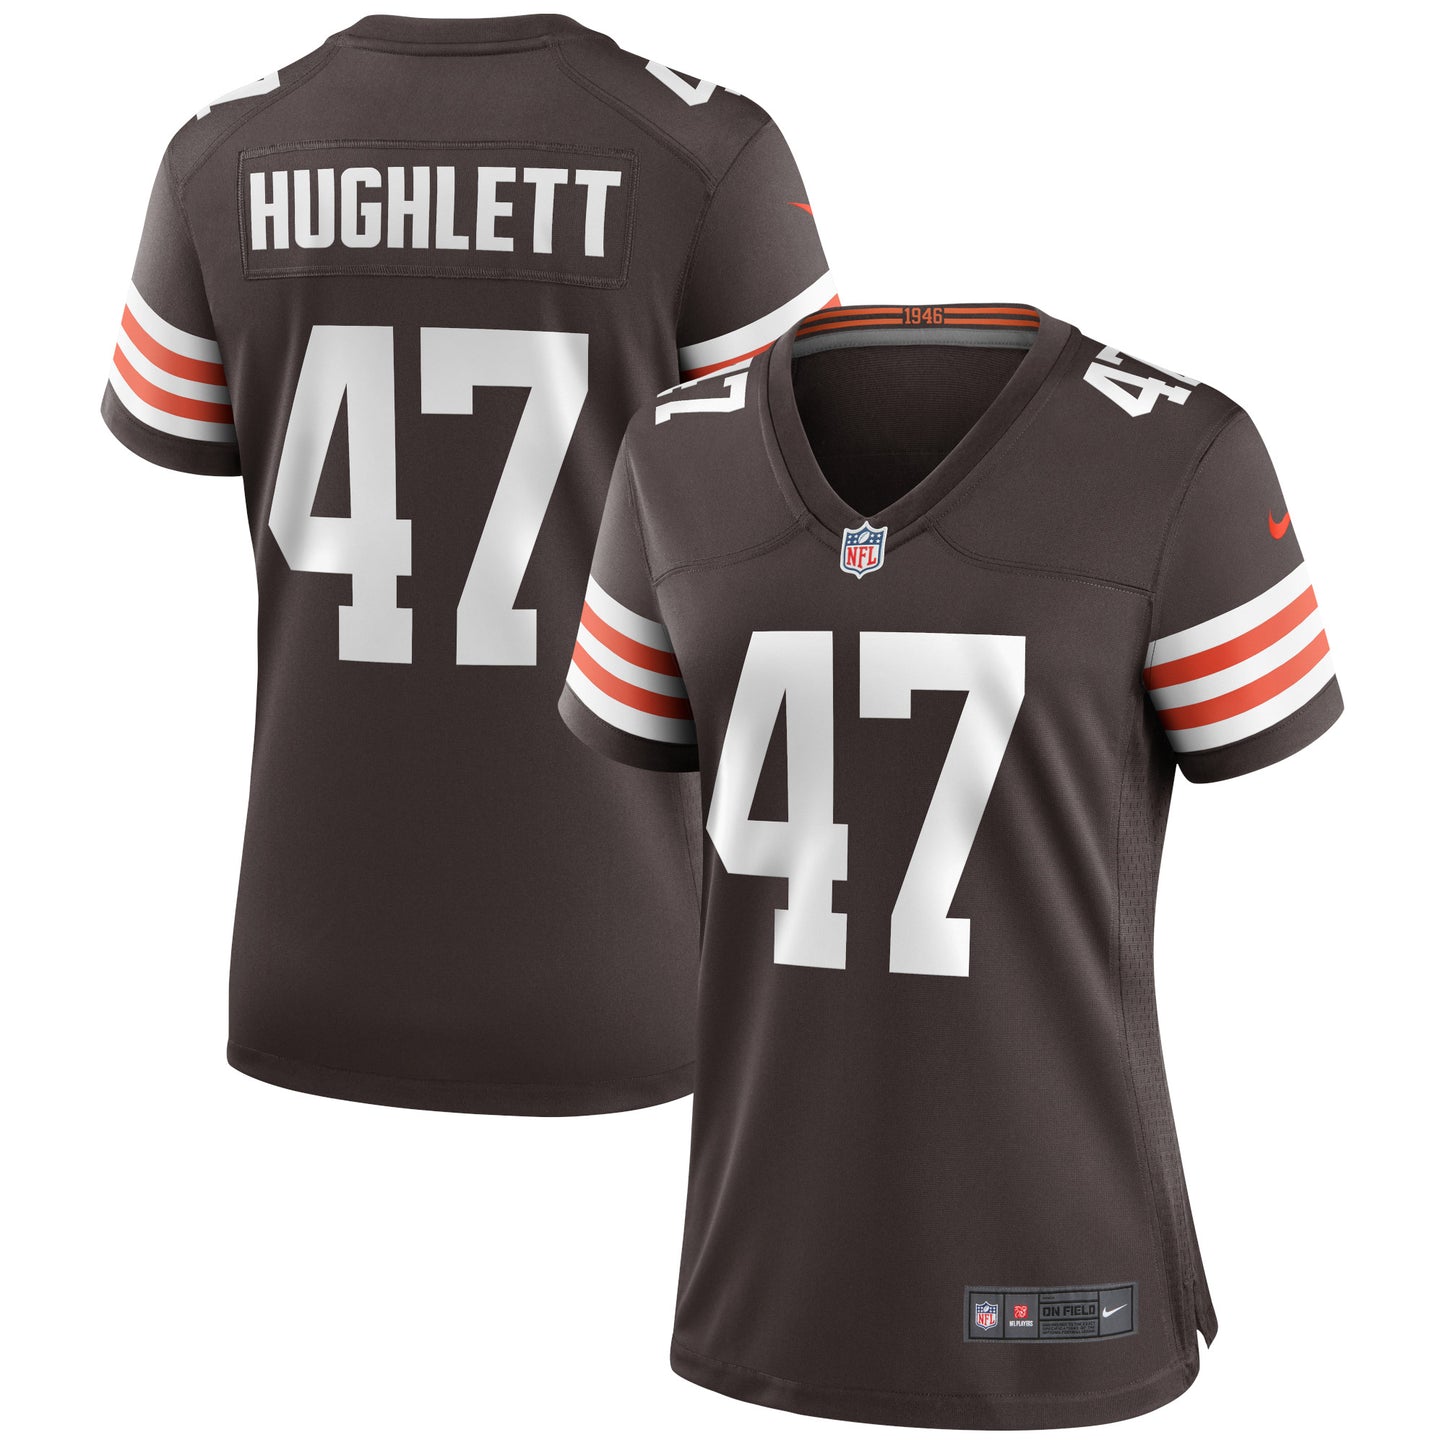 Charley Hughlett Cleveland Browns Nike Women's Game Jersey - Brown